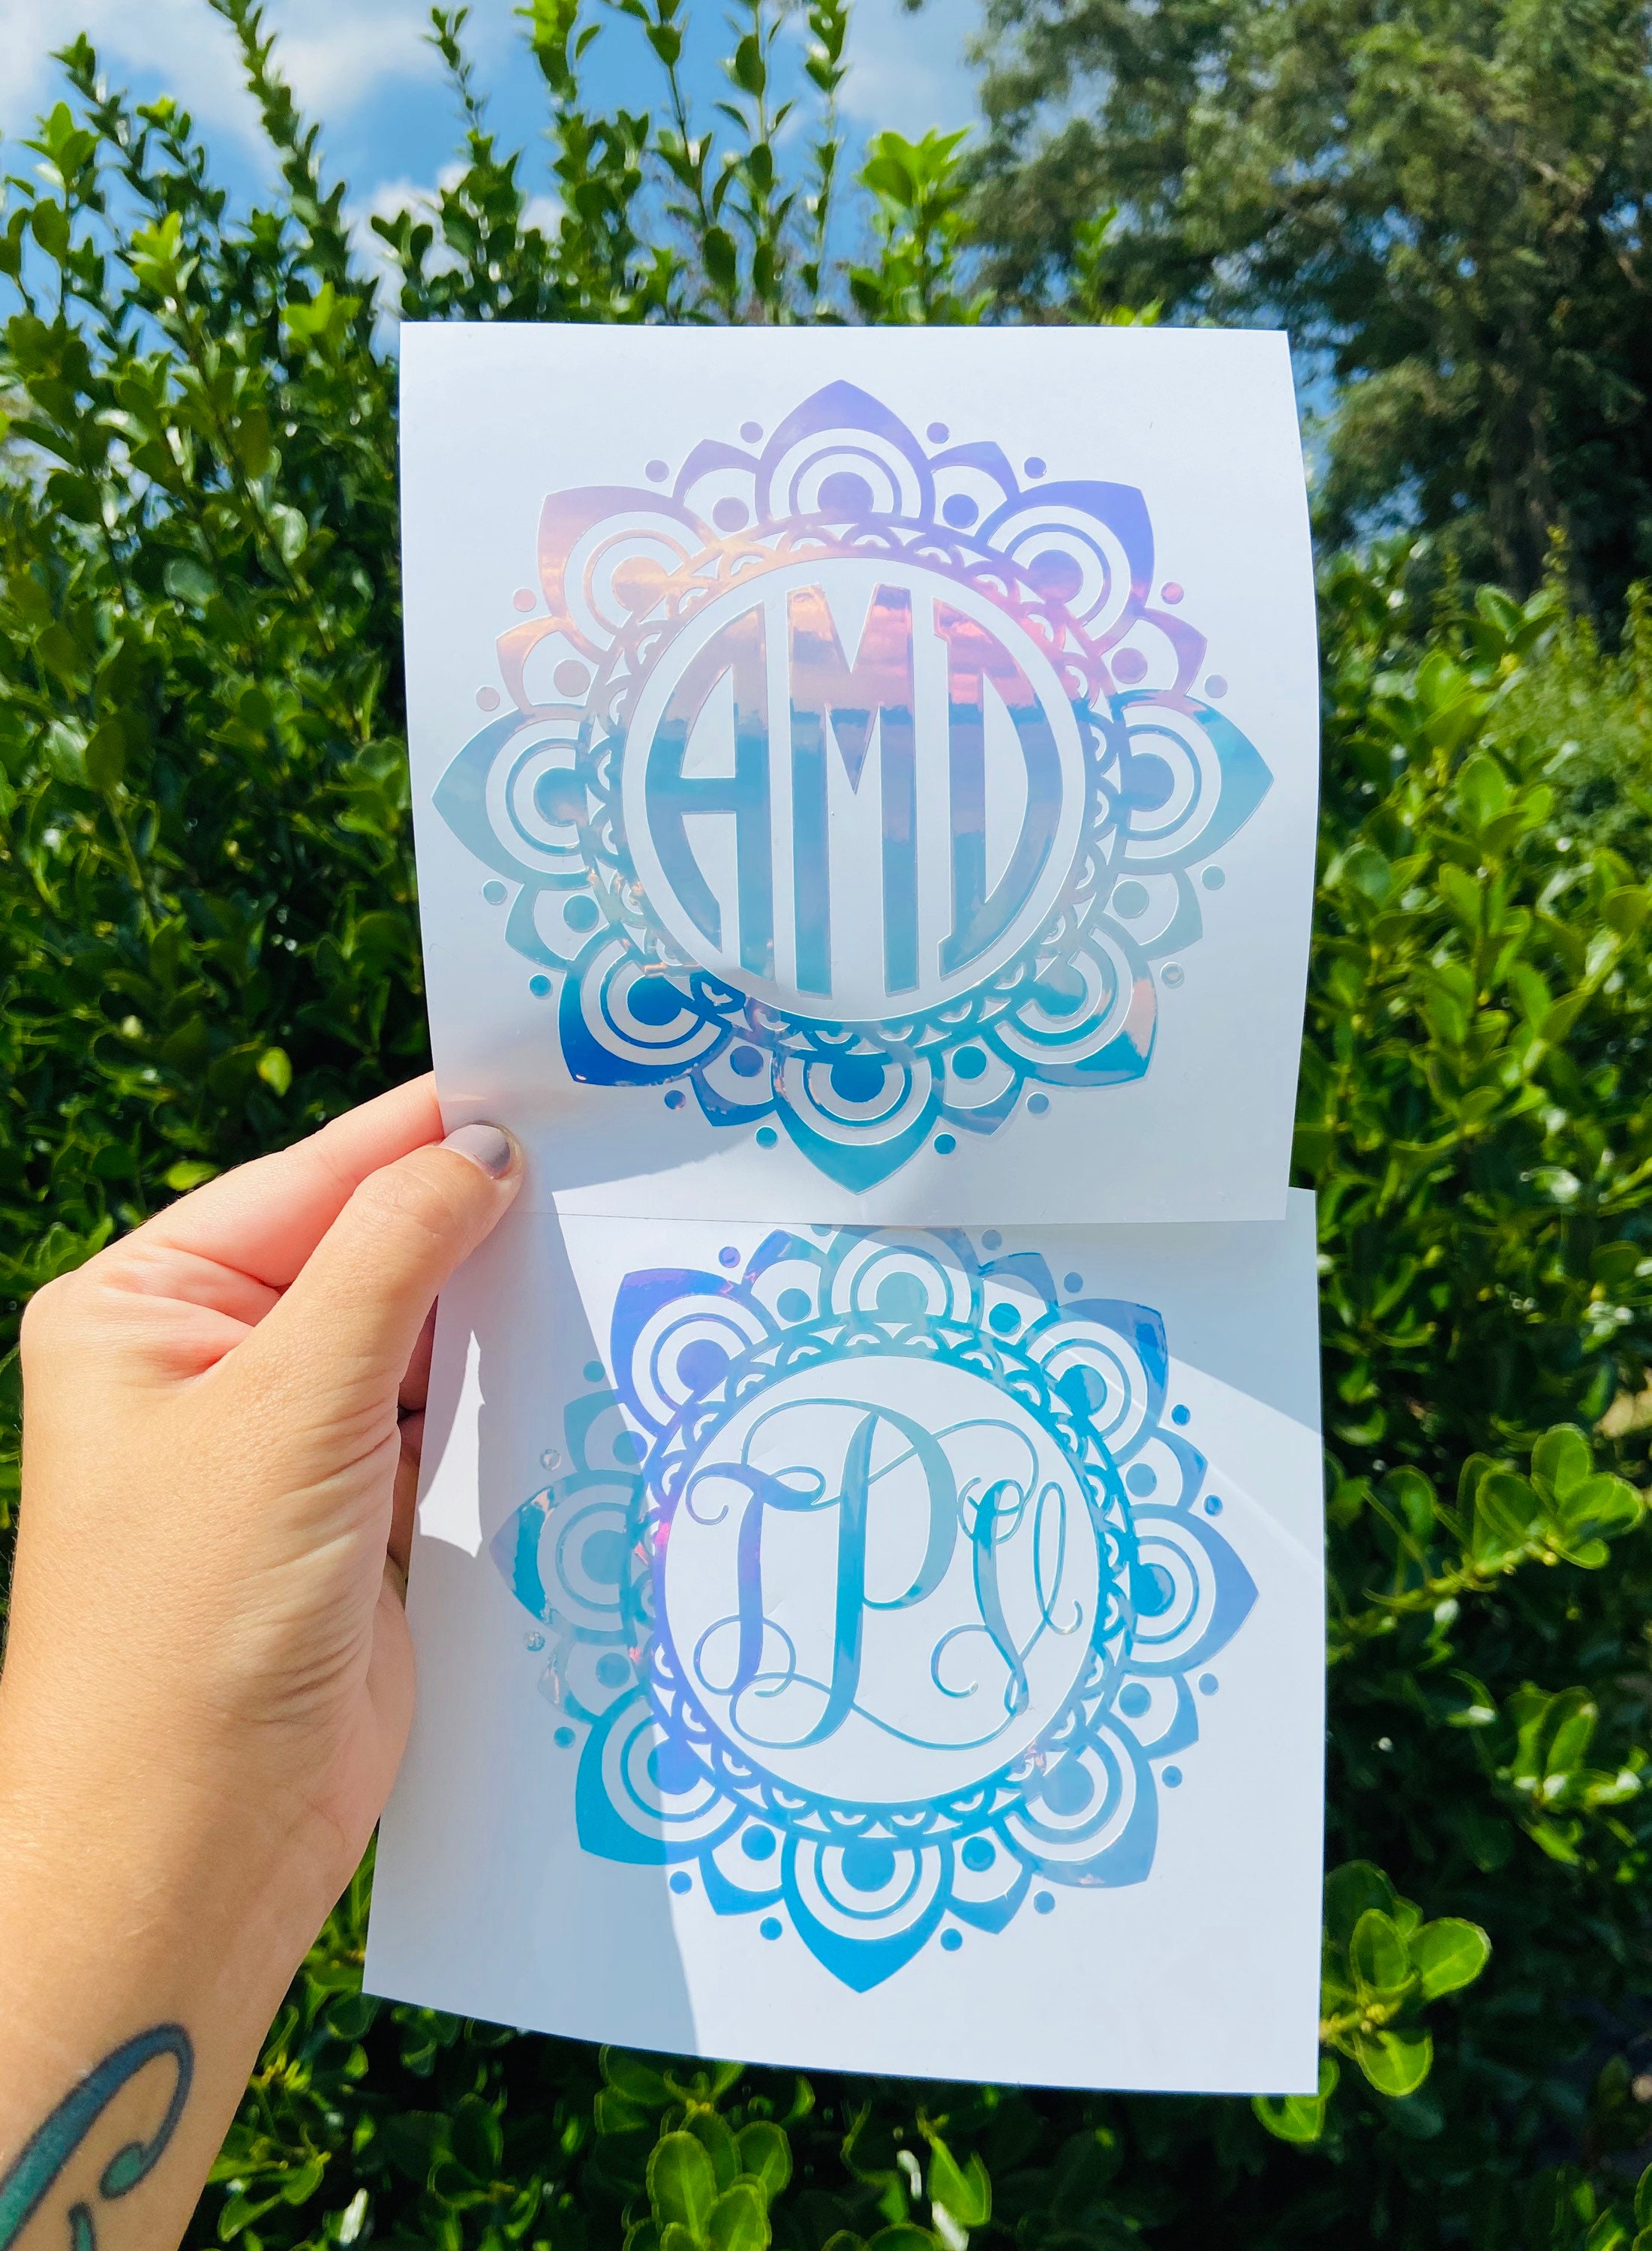 Monogram Decal Boho Monogrammed Decal Holographic Decal 